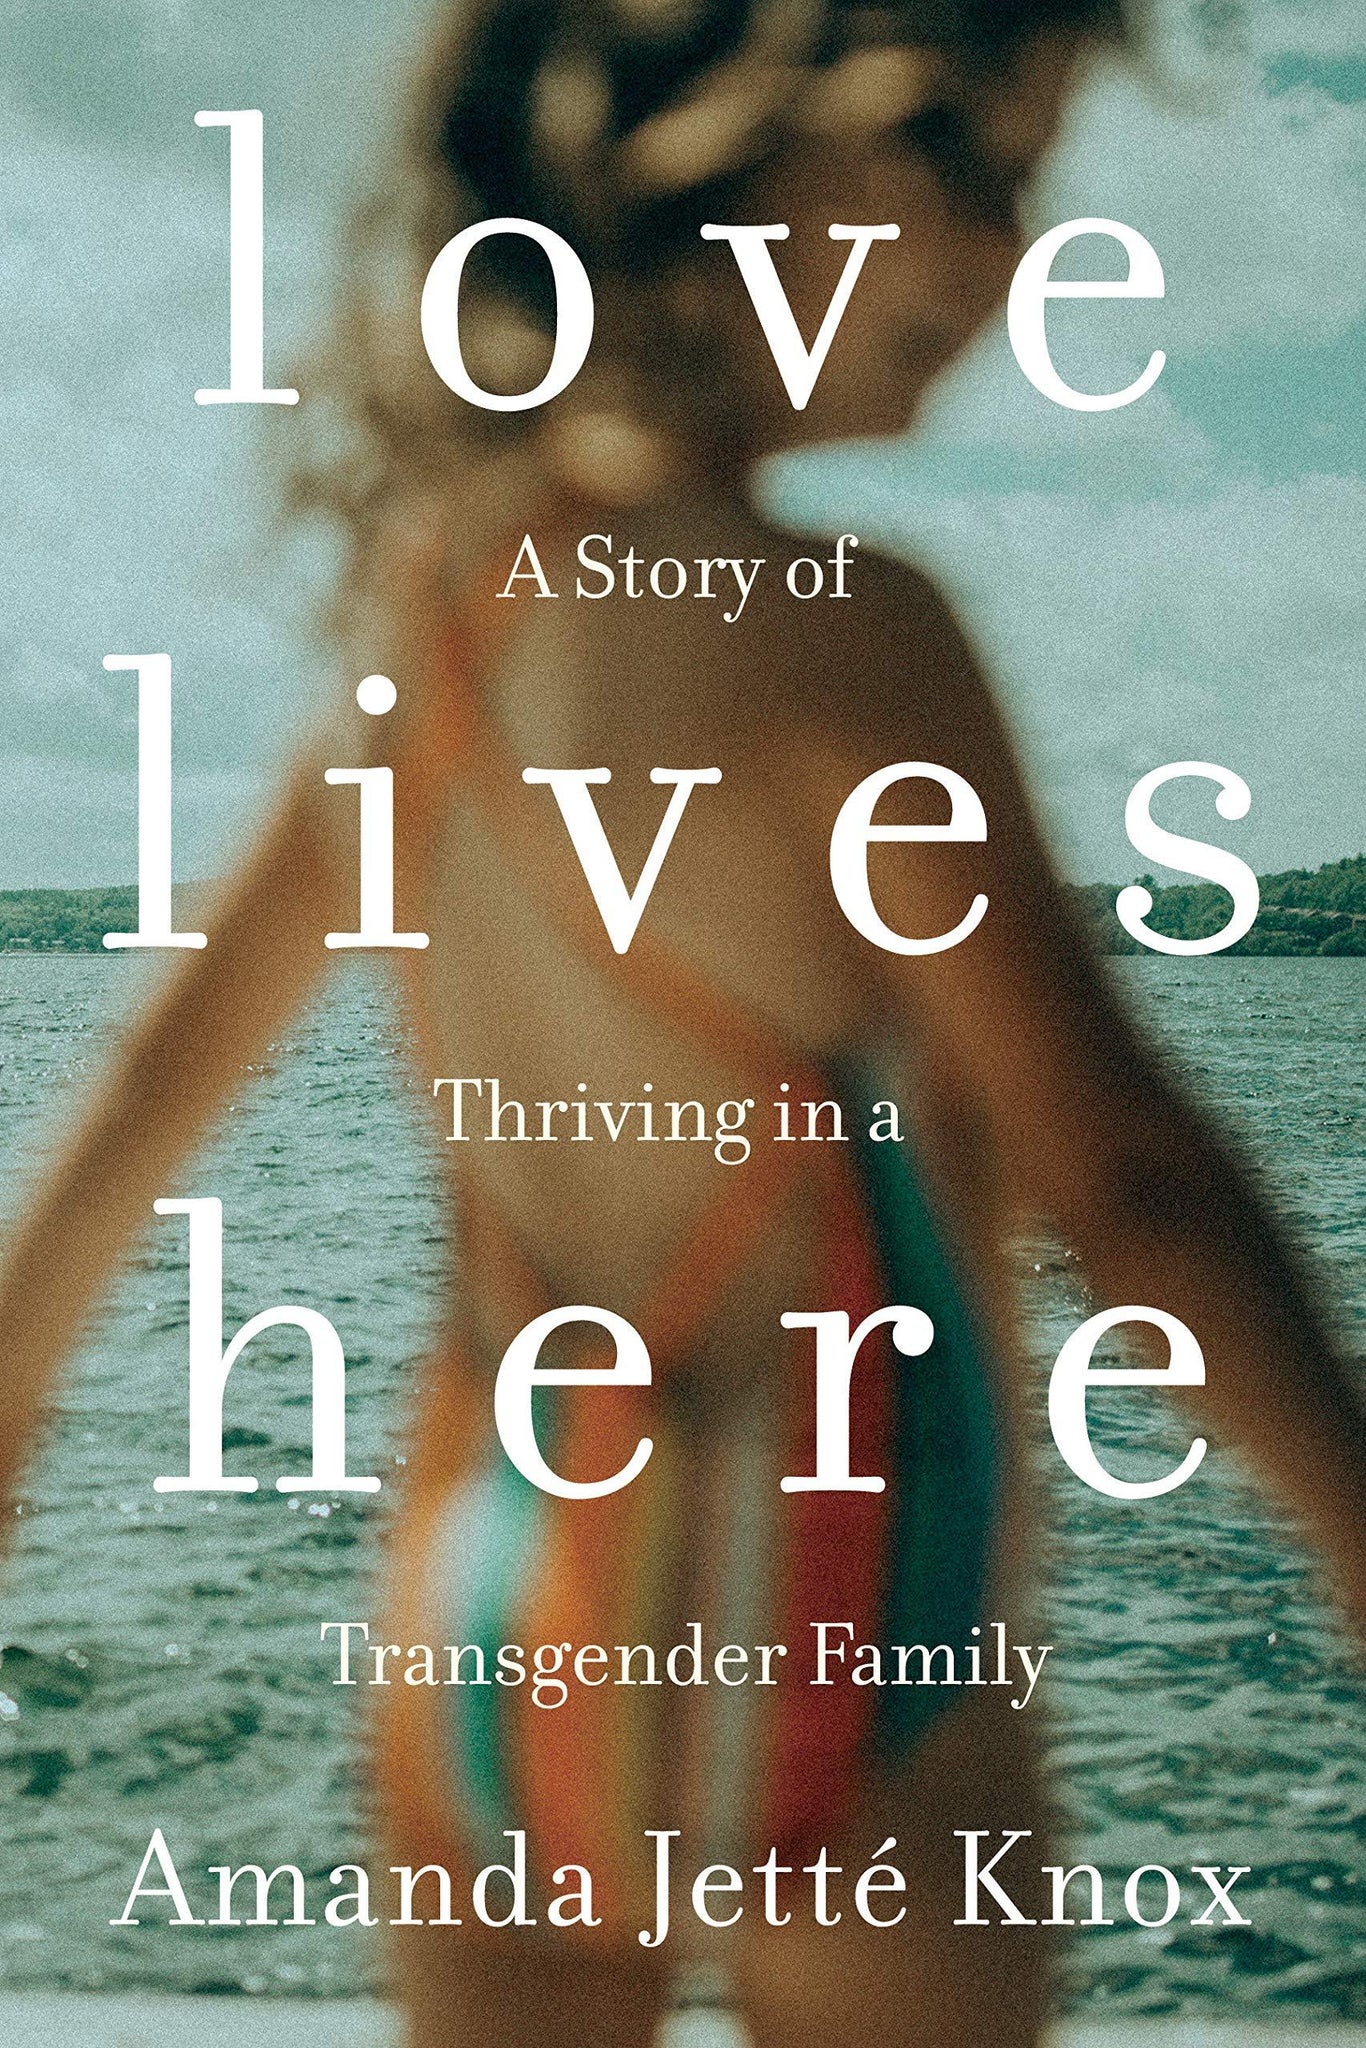 Love Lives Here: A Story of Thriving in a Transgender Family - ShopQueer.co